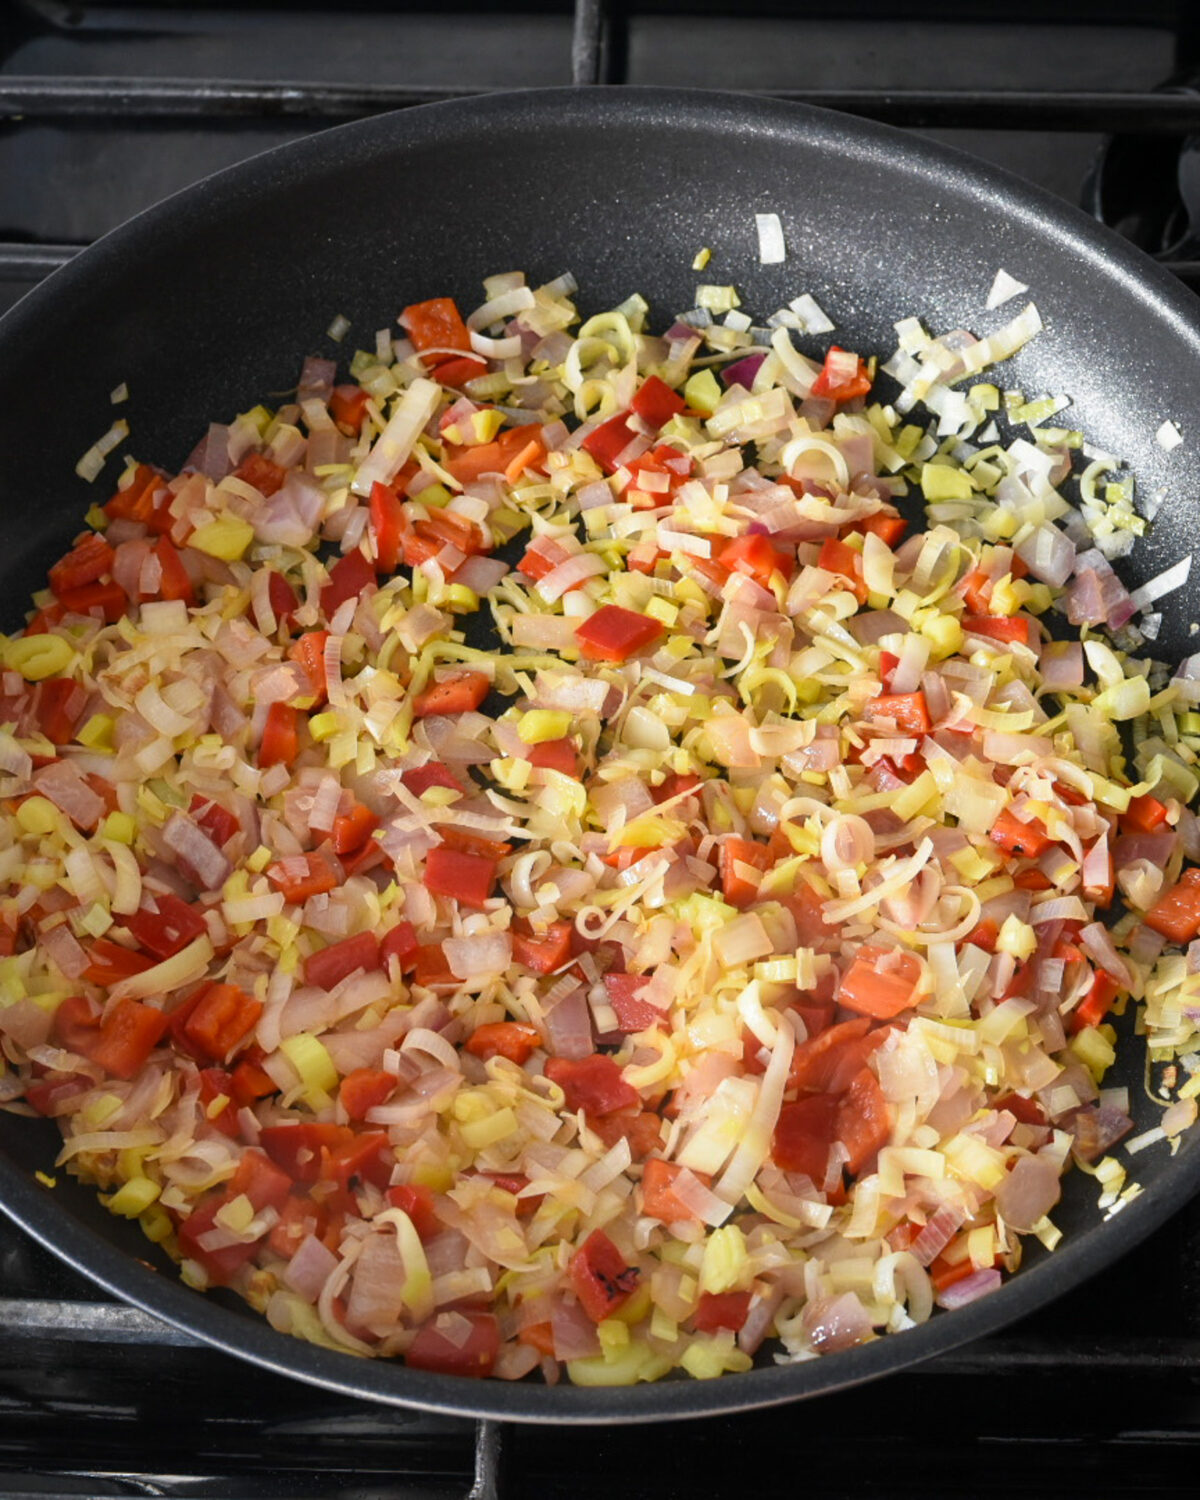 A pan of onions, leeks, and red peppers cooked until just soft, 